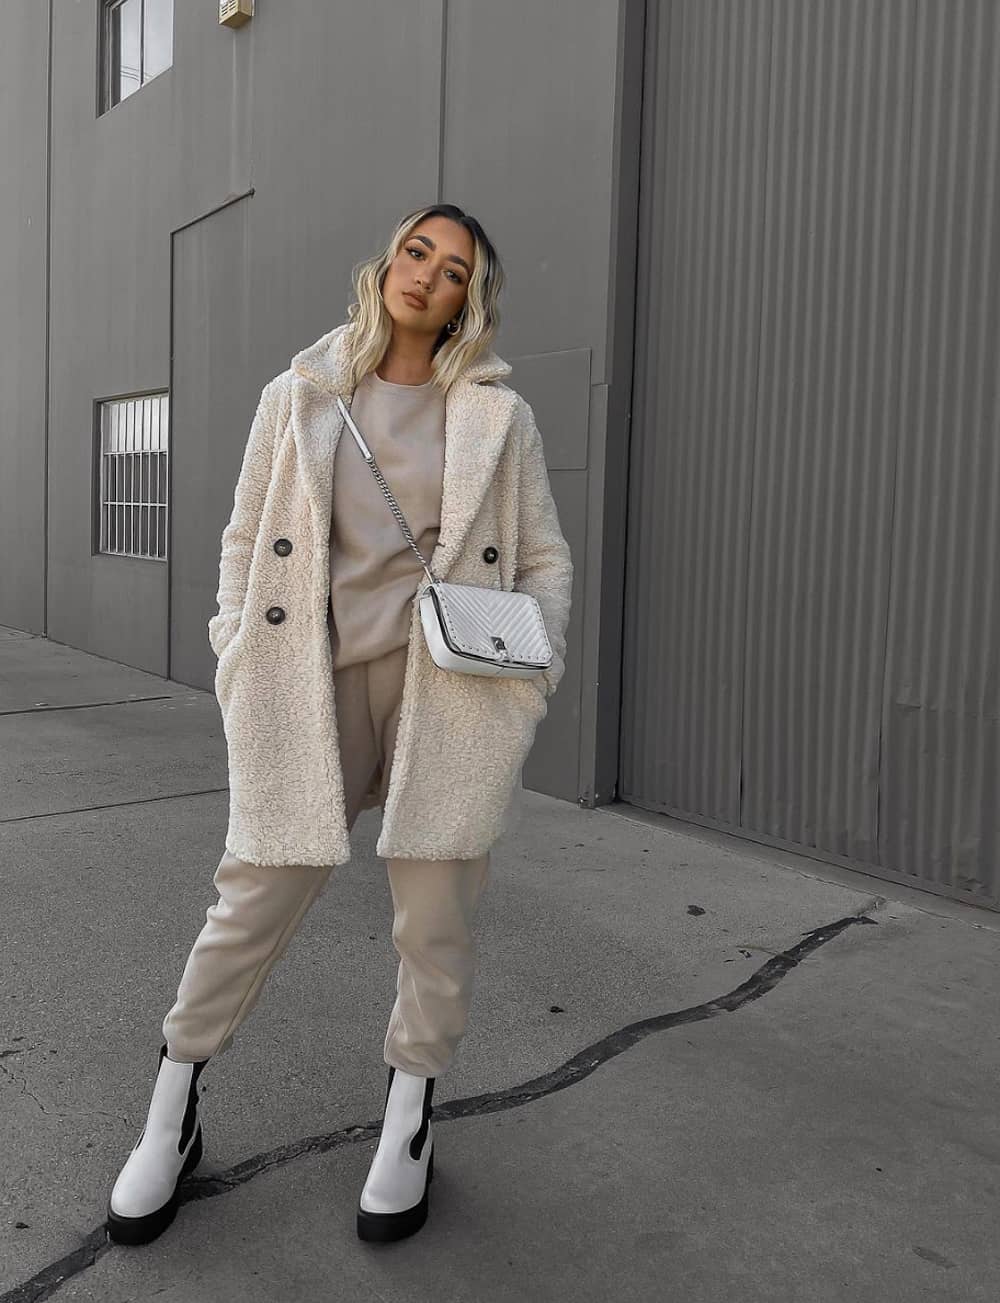 image of a woman wearing a long white shearling coat over a matching taupe sweatsuit with white lug boots